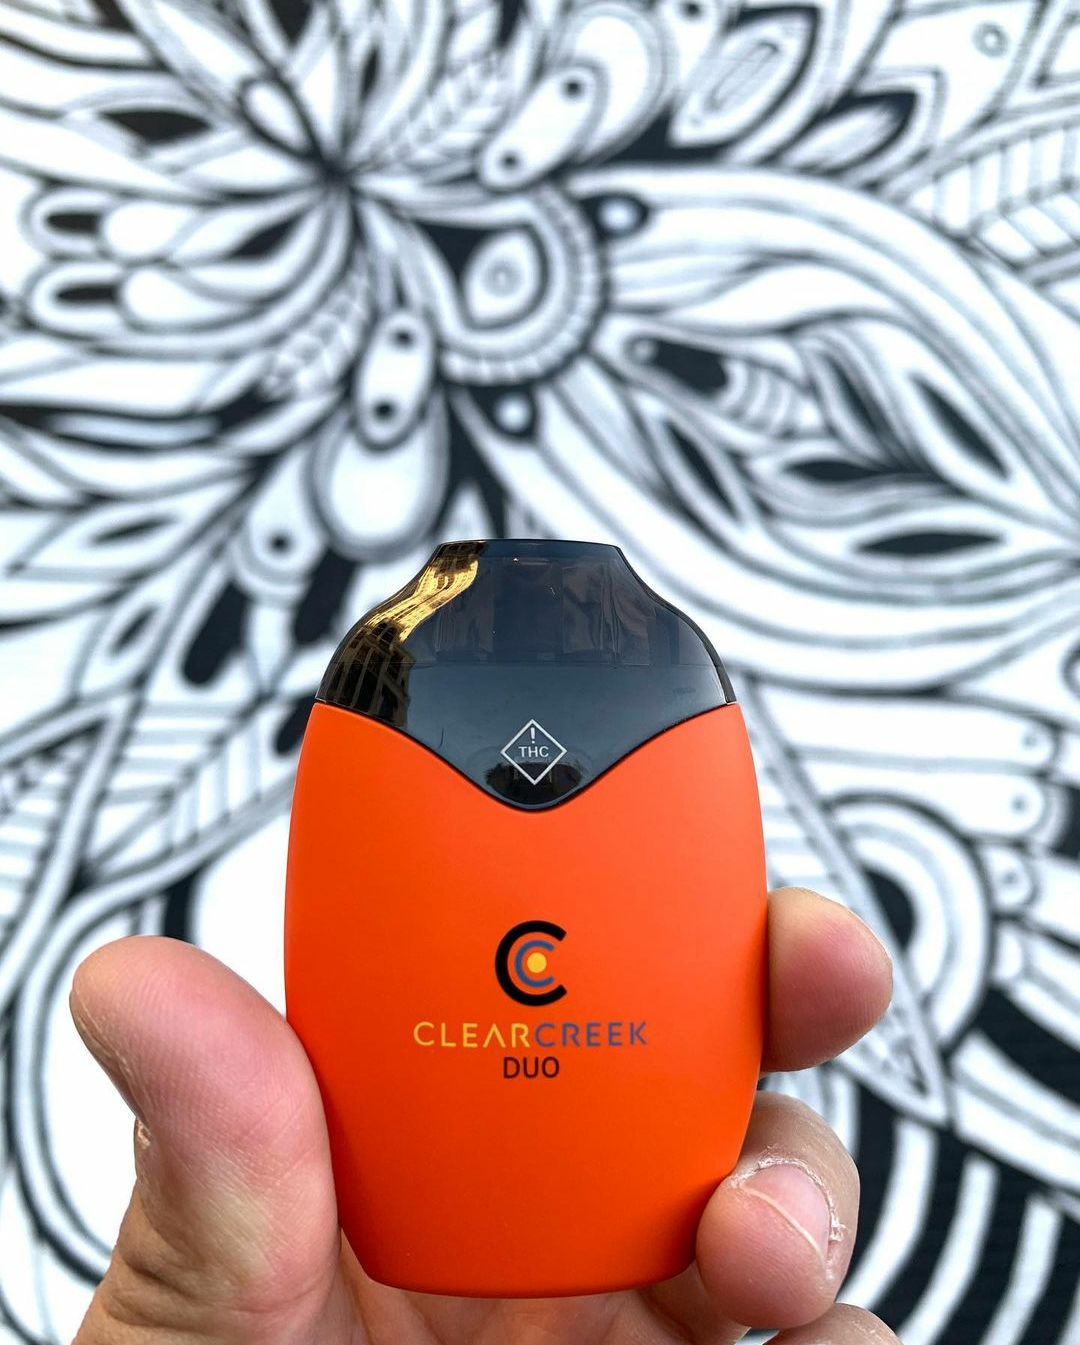 A man holding up a Clear Creek Extracts DUO pod up against a graphic black and white background. Before consuming, it's important to review Everything Consumers Should Know About Cannabis Vapes.